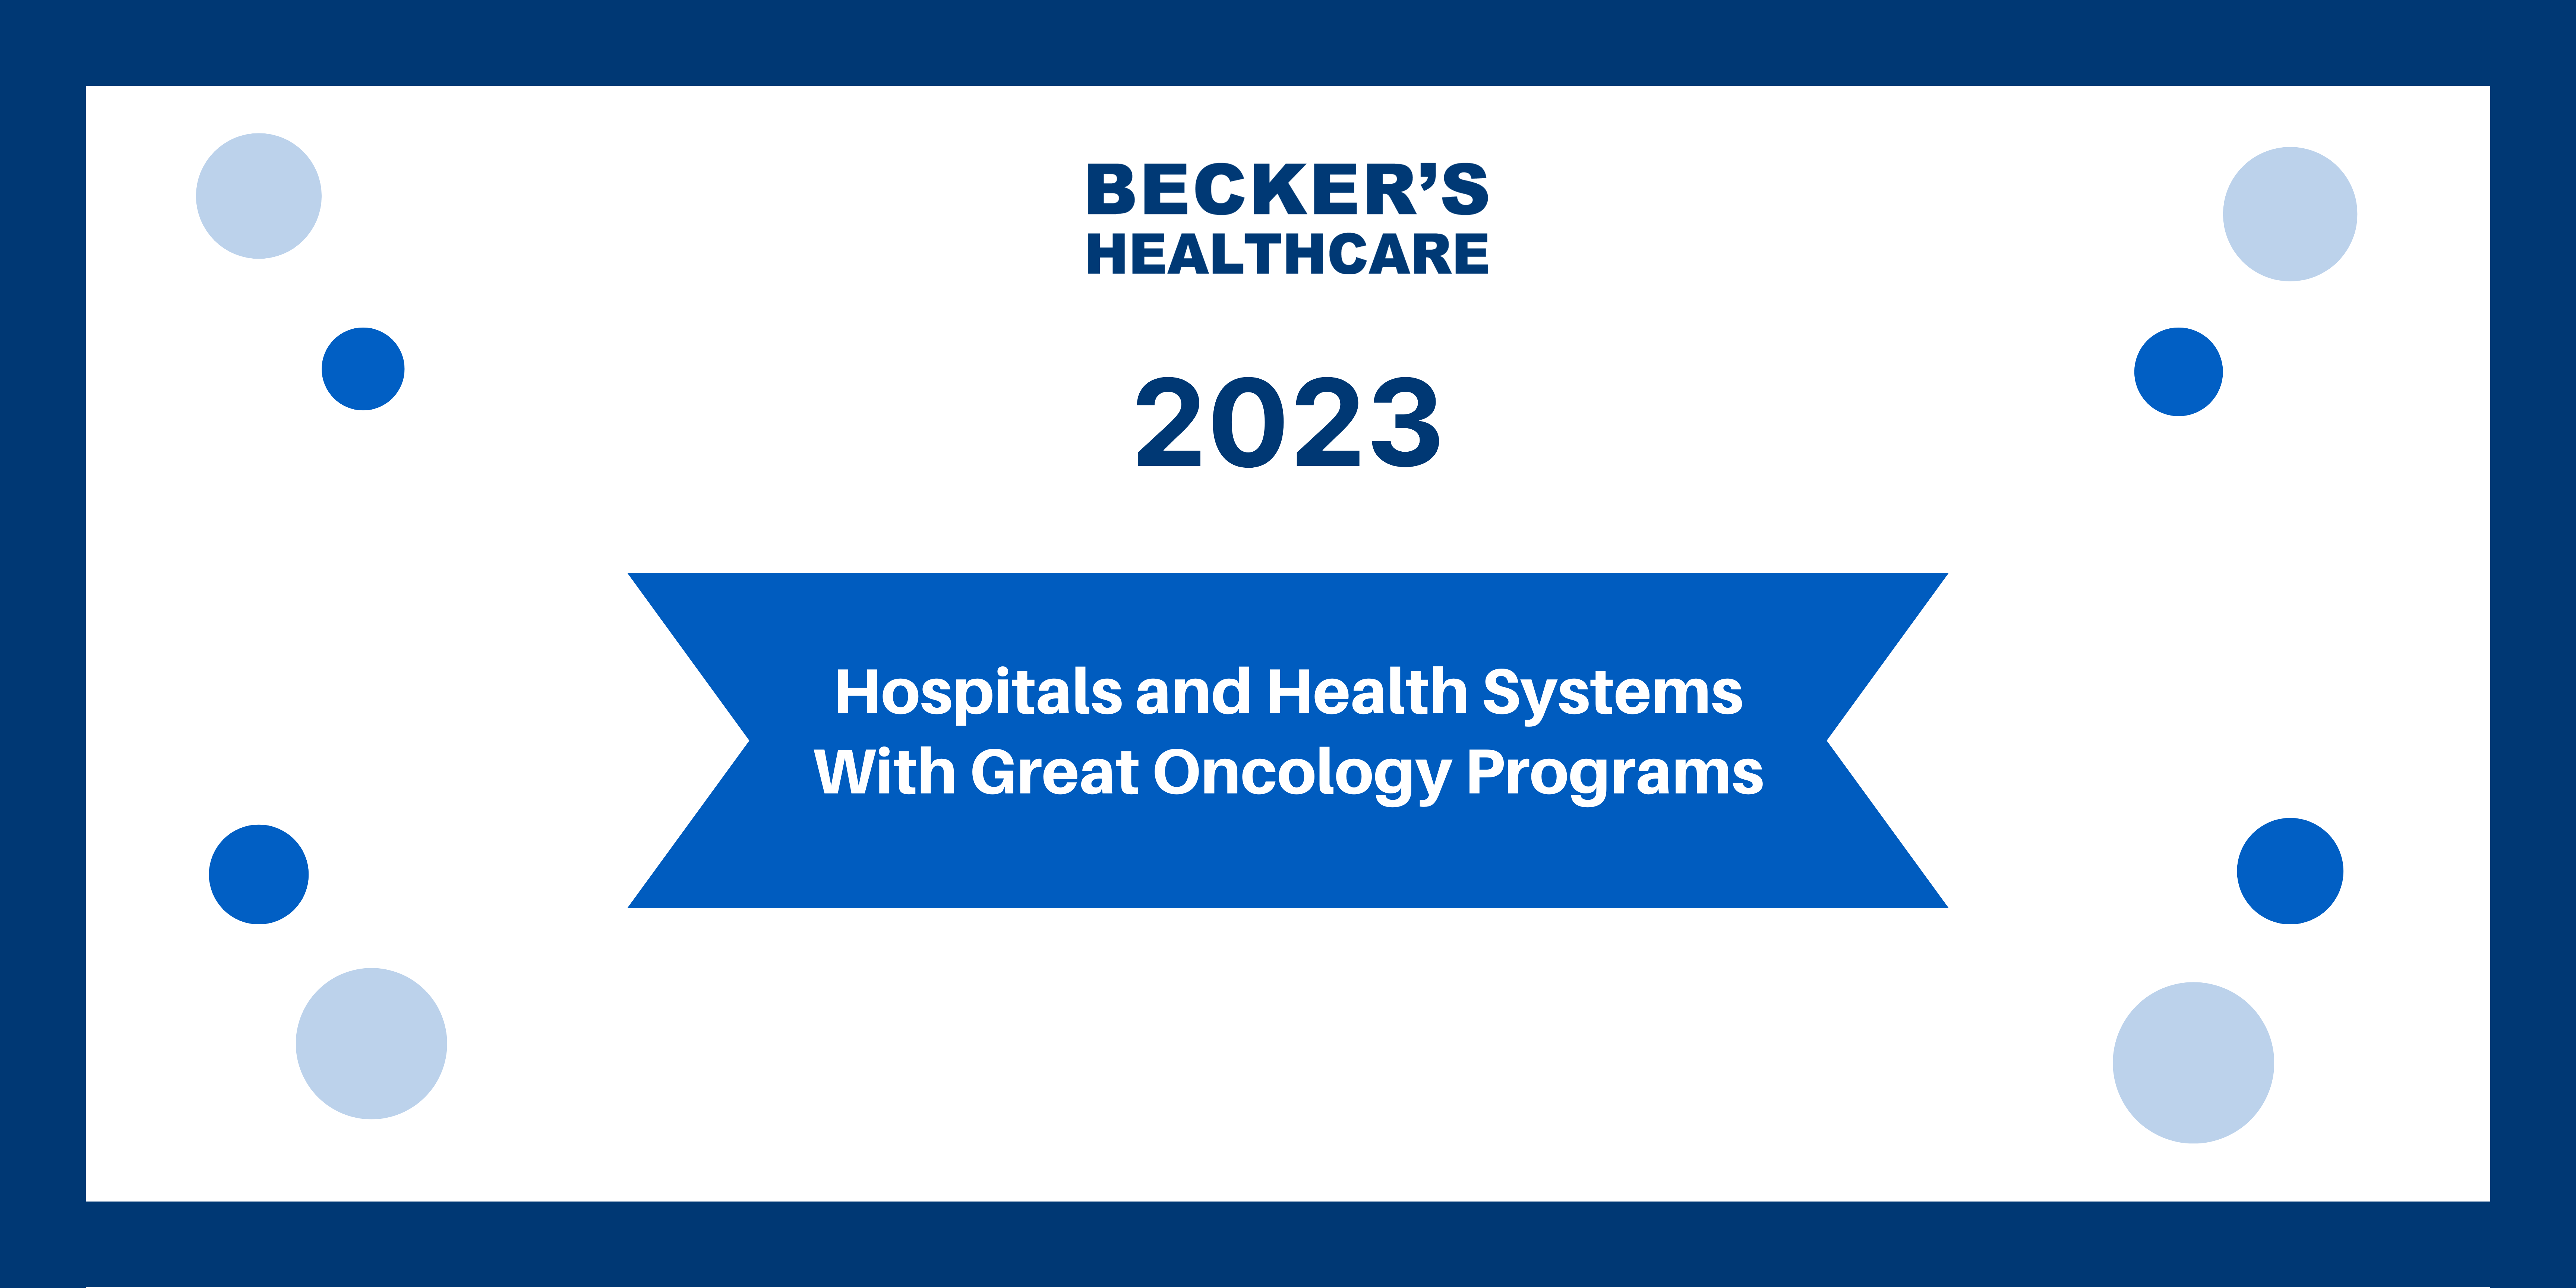 Becker's Heathcare 2023: Hospitals and Health Systems with Great Oncology Programs